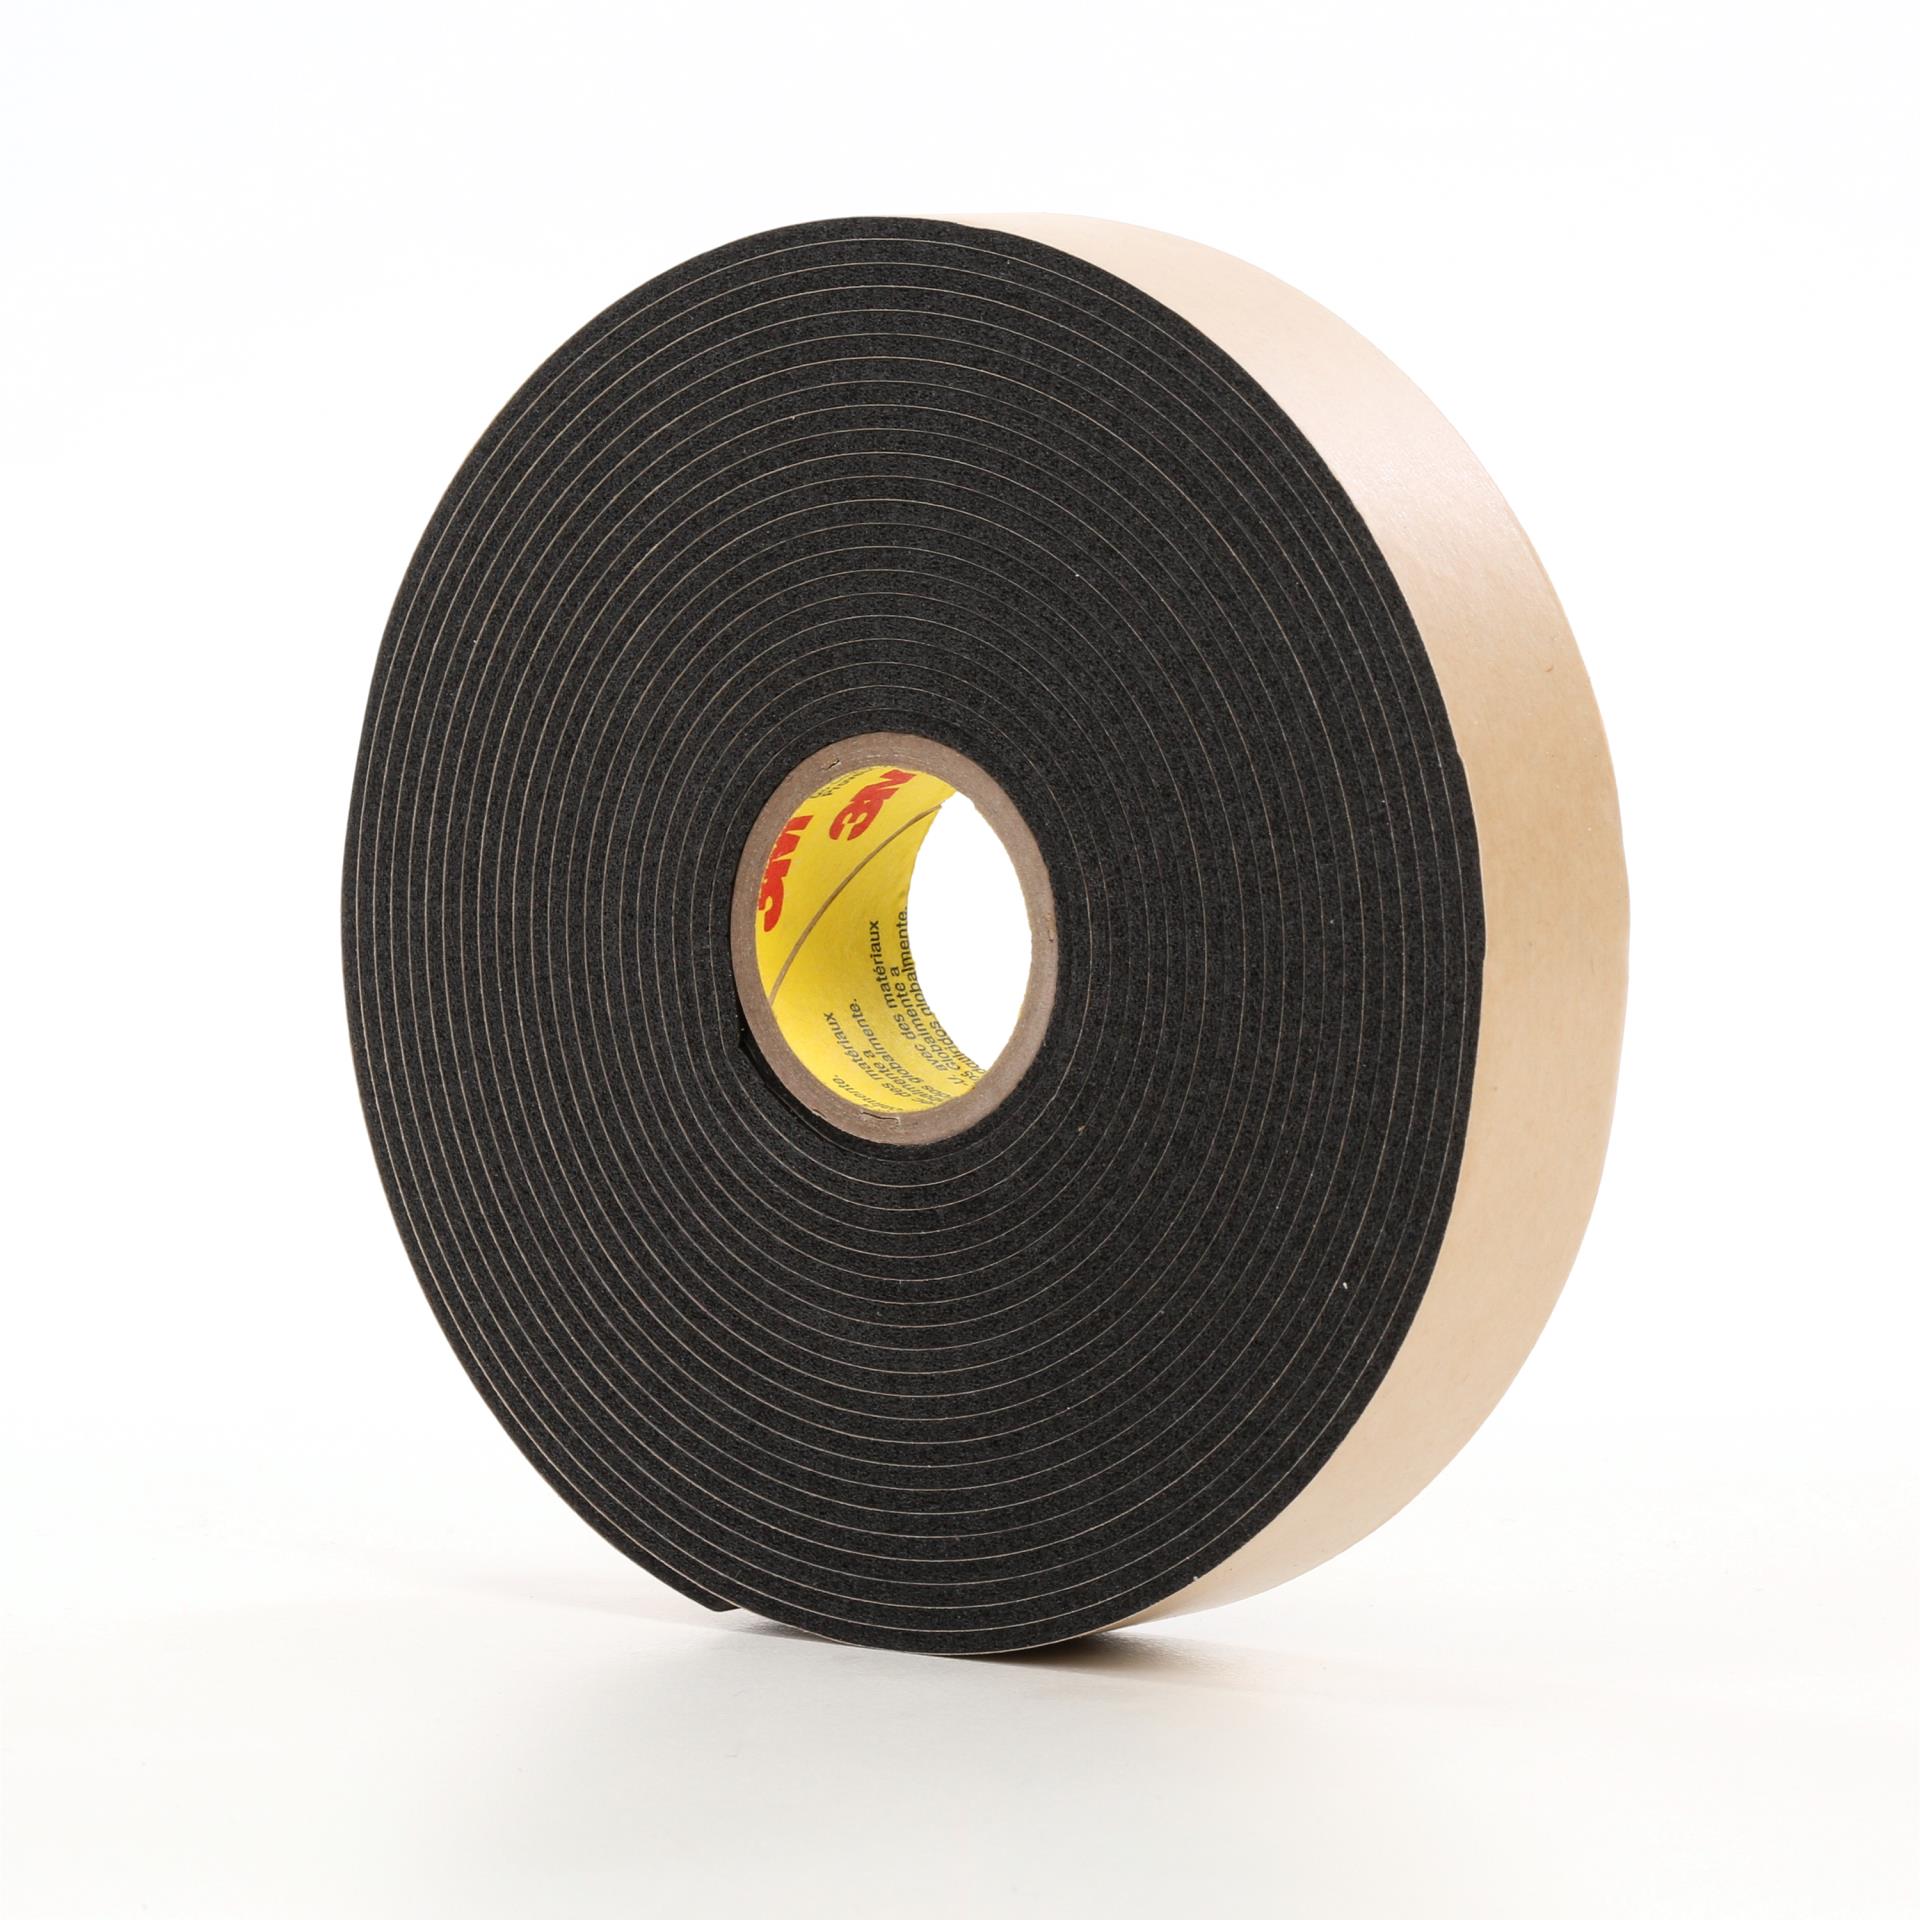 1000 sq 1 in x 1 in 3M™ Double Coated Urethane Foam Tape 4026 62 mil Natural 